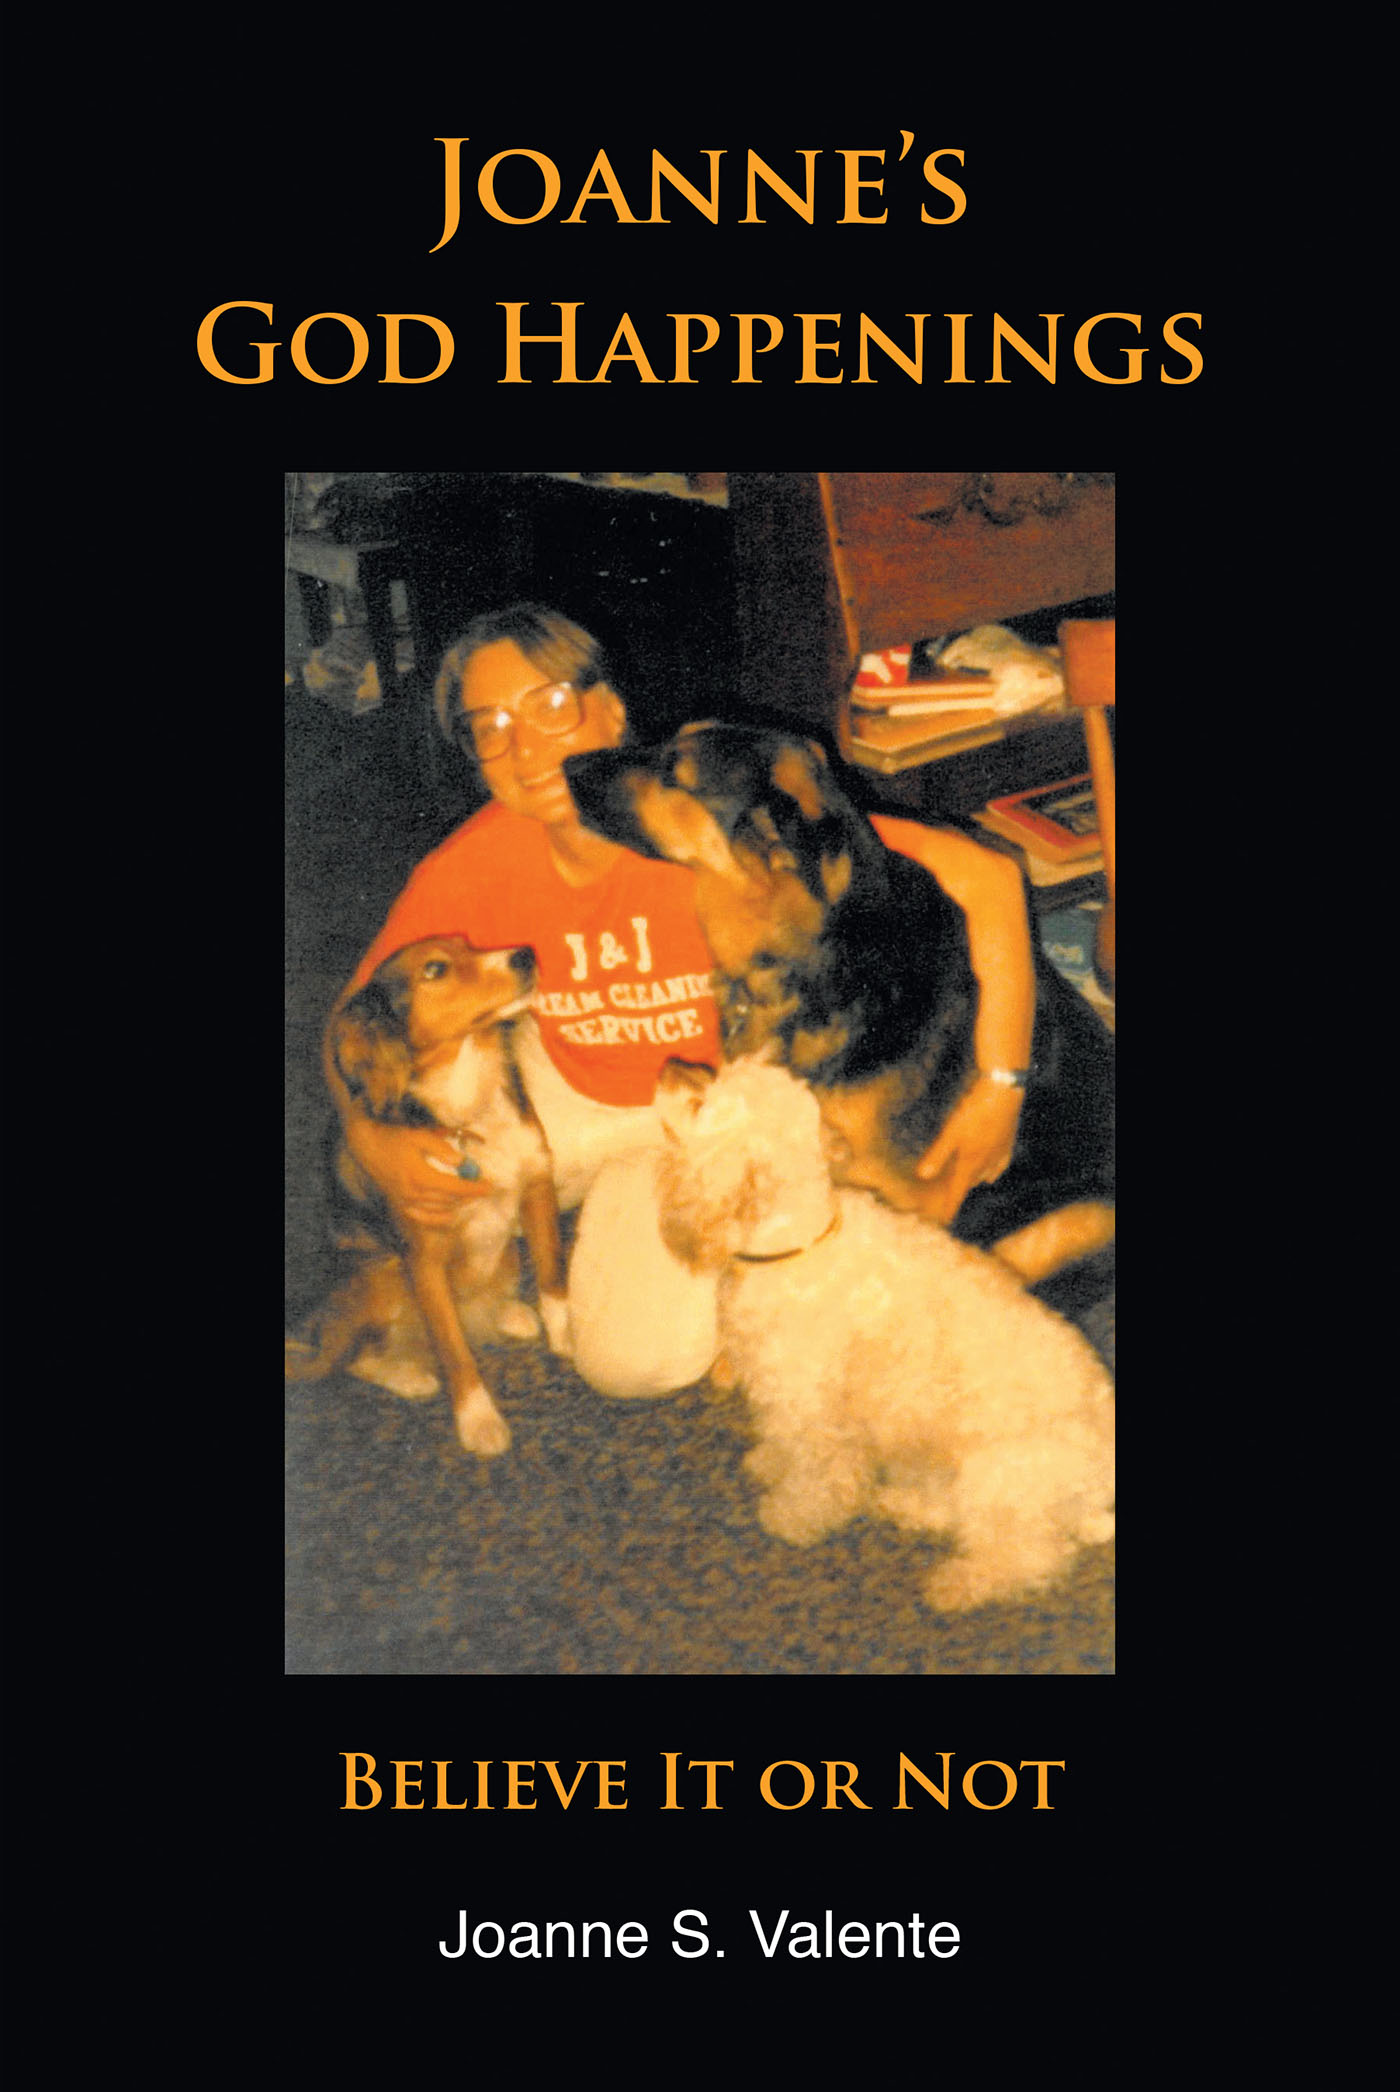 Joanne S. Valente’s Newly Released "Joanne’s God Happenings: Believe It or Not" is a Spiritually Driven Memoir That Explores Key Experiences of Faith